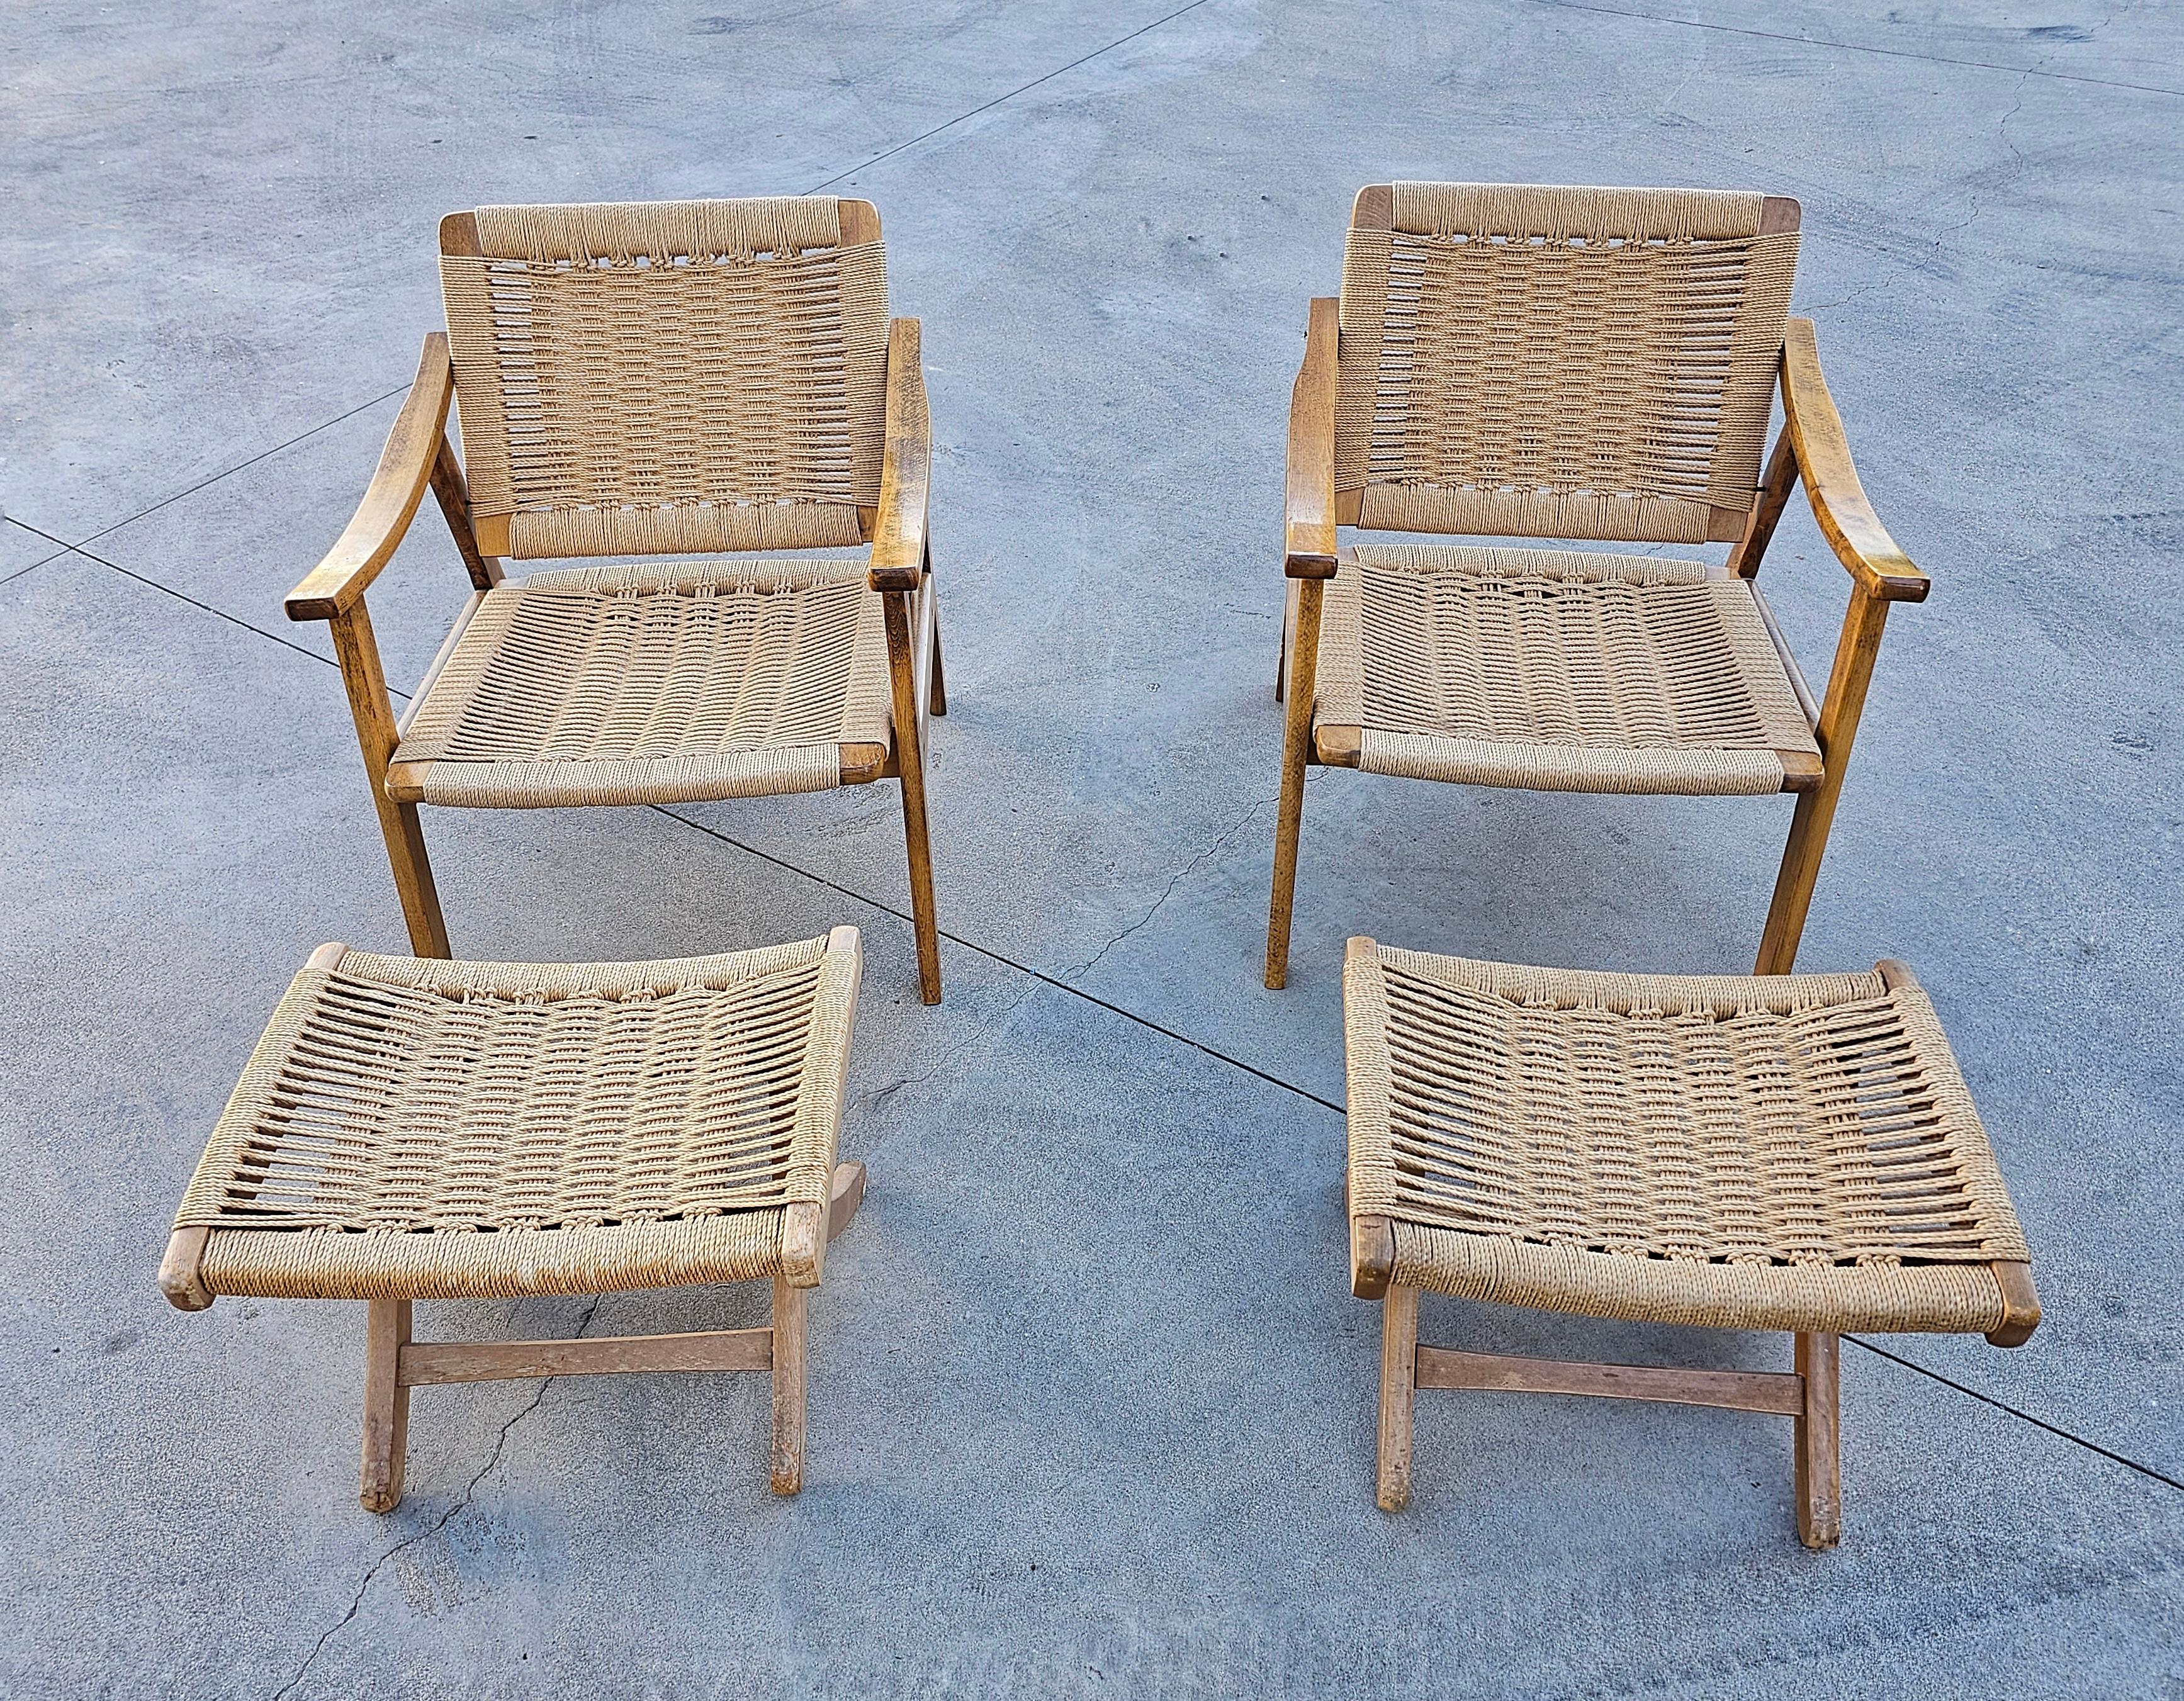 In this listing you will find two gorgeous, rare armchairs with ottomans done in oak with Danish paper cord hand-woven seats and backrests. They are designed in style of Hans J. Wegner and manufactured in Yugoslavia in 1960s.

This set consists of 4